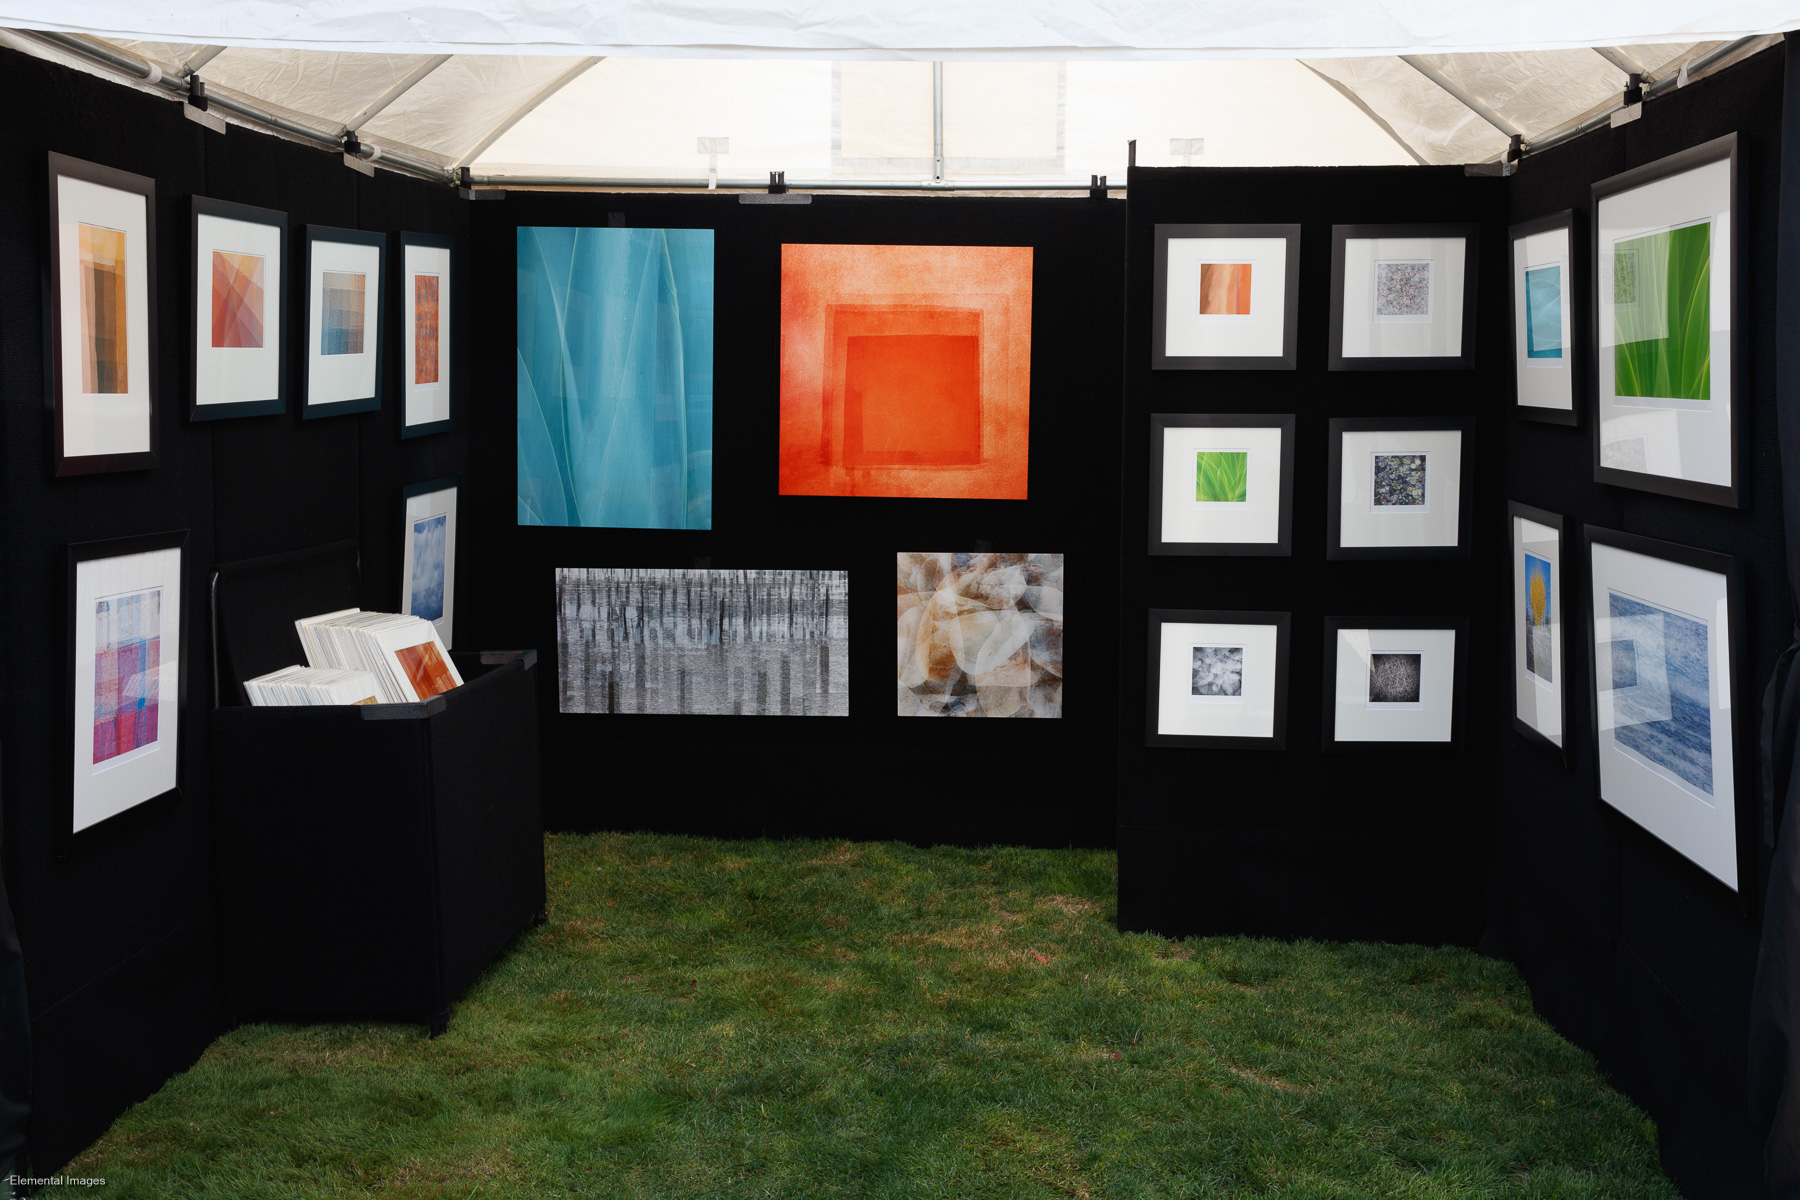 Selection of prints on display in outdoor art show booth |  |  |  - © Elemental Images - All Rights Reserved Worldwide